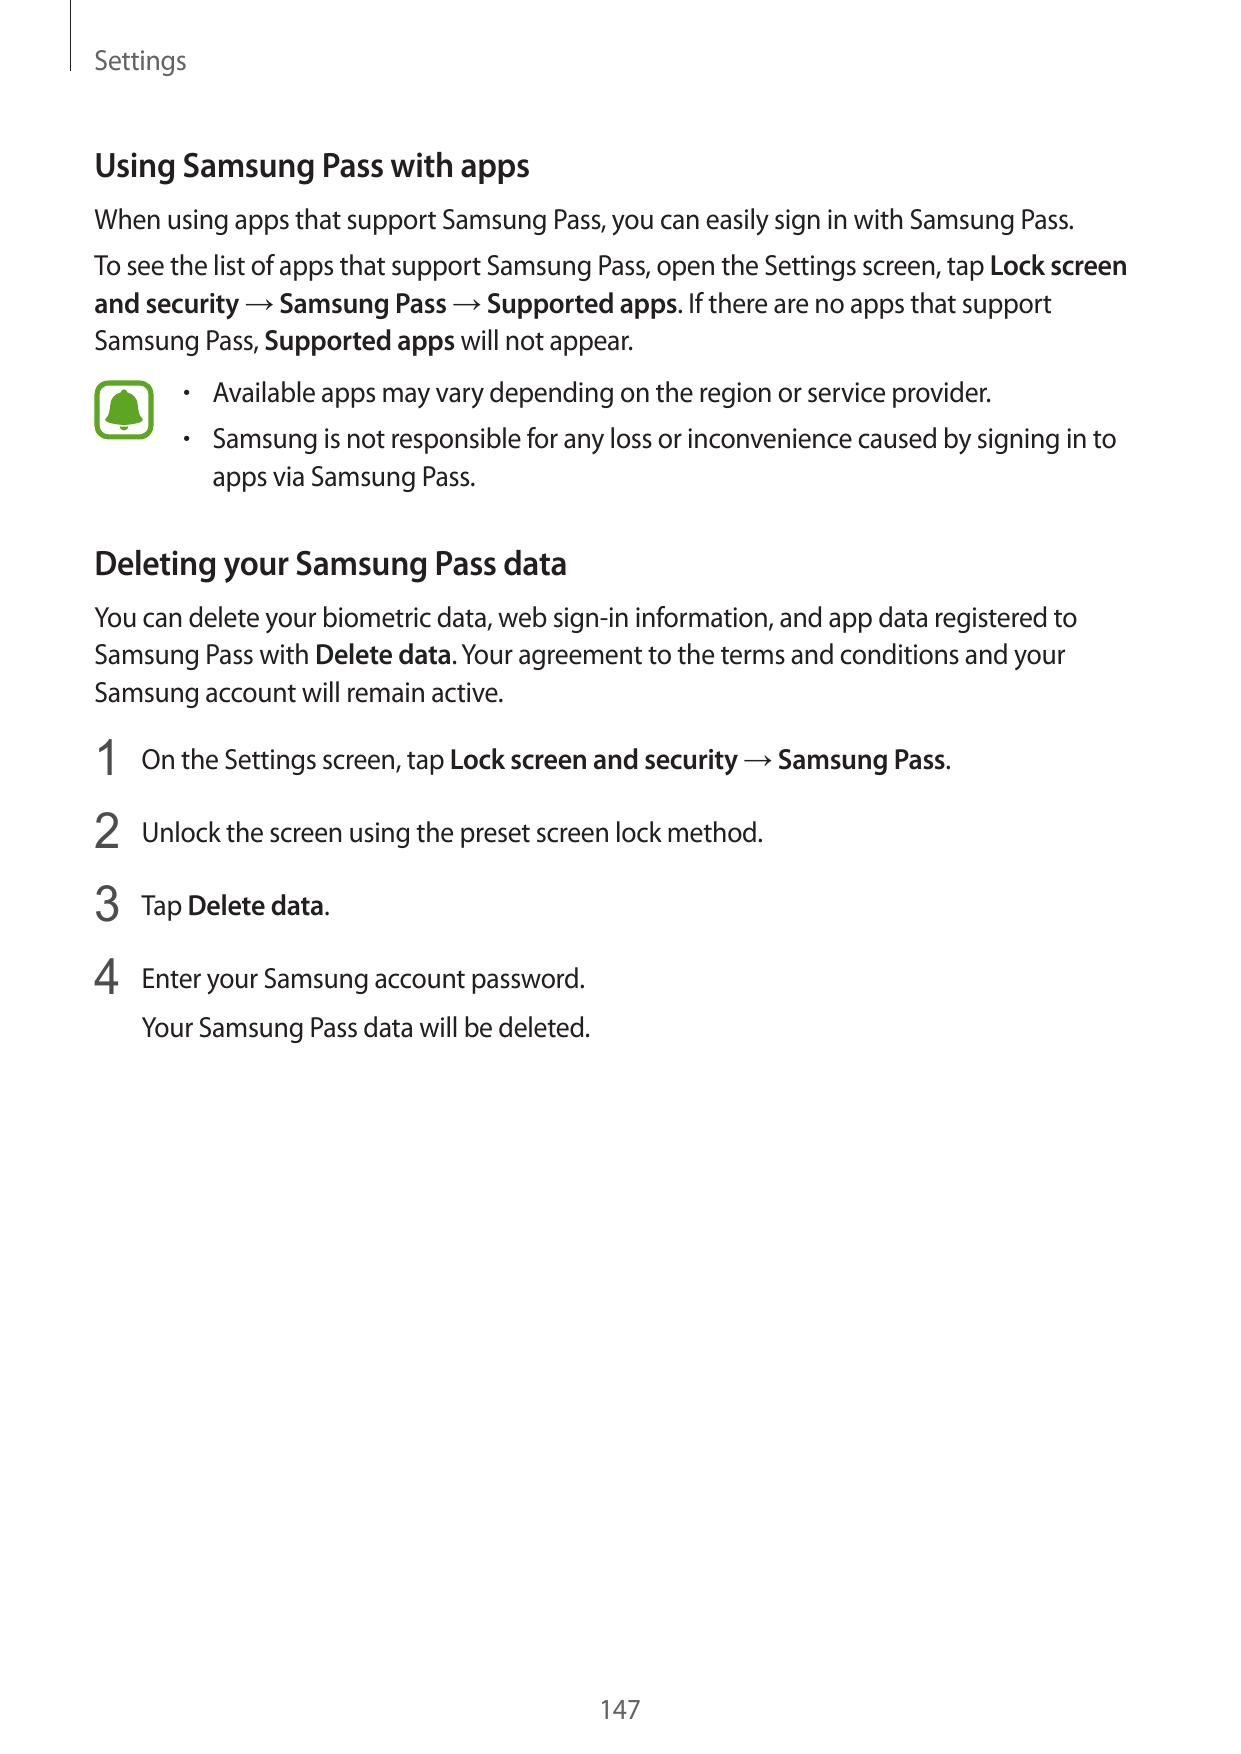 SettingsUsing Samsung Pass with appsWhen using apps that support Samsung Pass, you can easily sign in with Samsung Pass.To see t